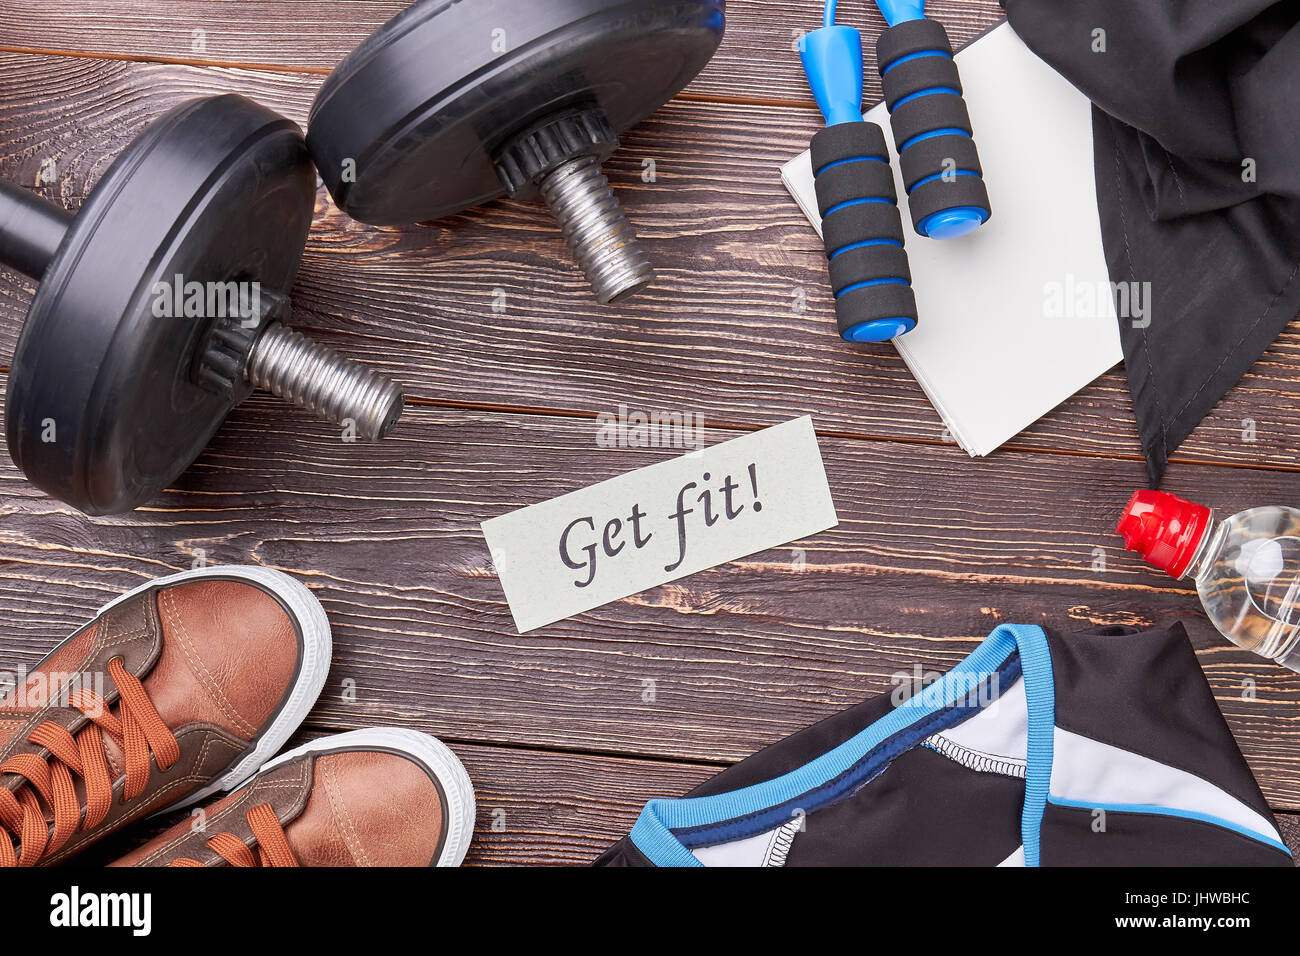 Get fit with active physical training. Stock Photo